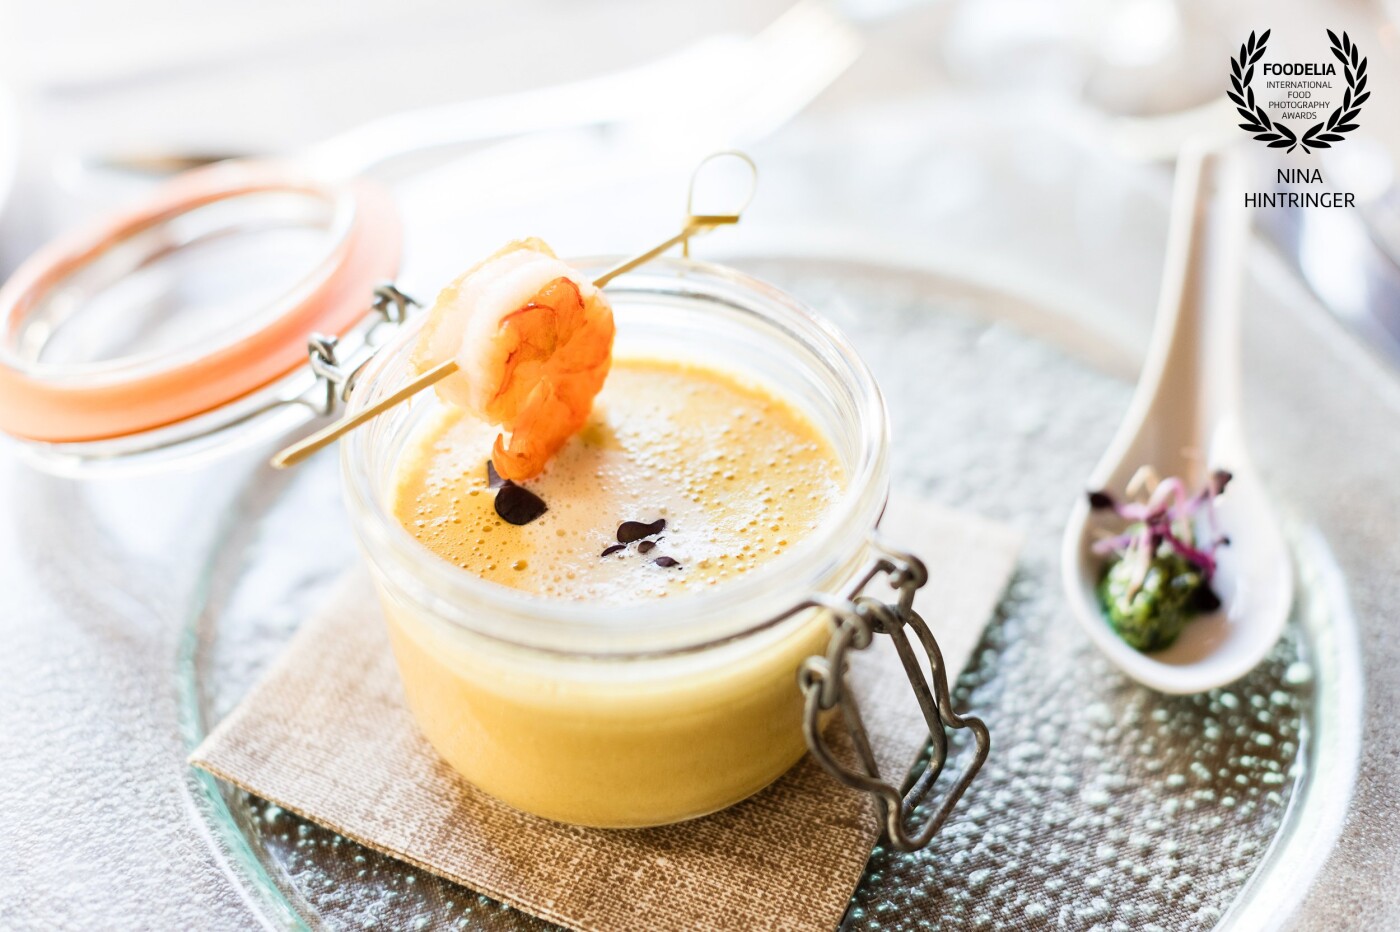 Hotel Solaria in Ischgl rebuilds some rooms every few years and this time their suites got a beautiful facelift. We also got the chance to photograph delicious food created by their chef de cuisine. Pumpkin soup with a tasty topping was the start of this exquisite photo shoot.